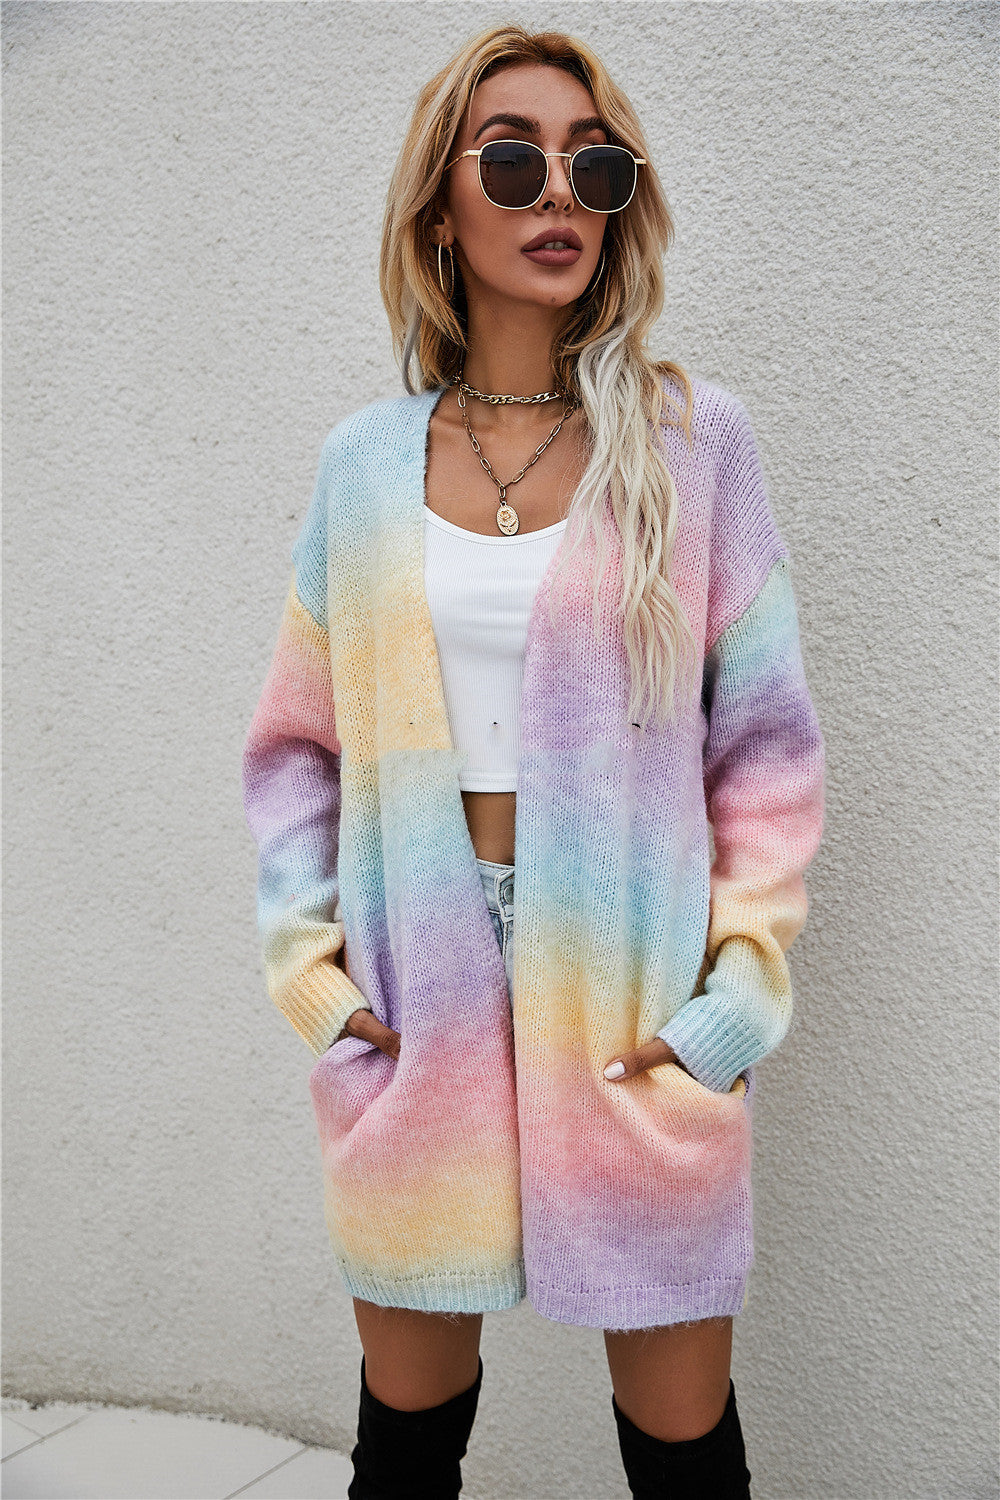 Sweater Rainbow Tie-dye Mid-length Plus Size Cardigan Knitted Jacket